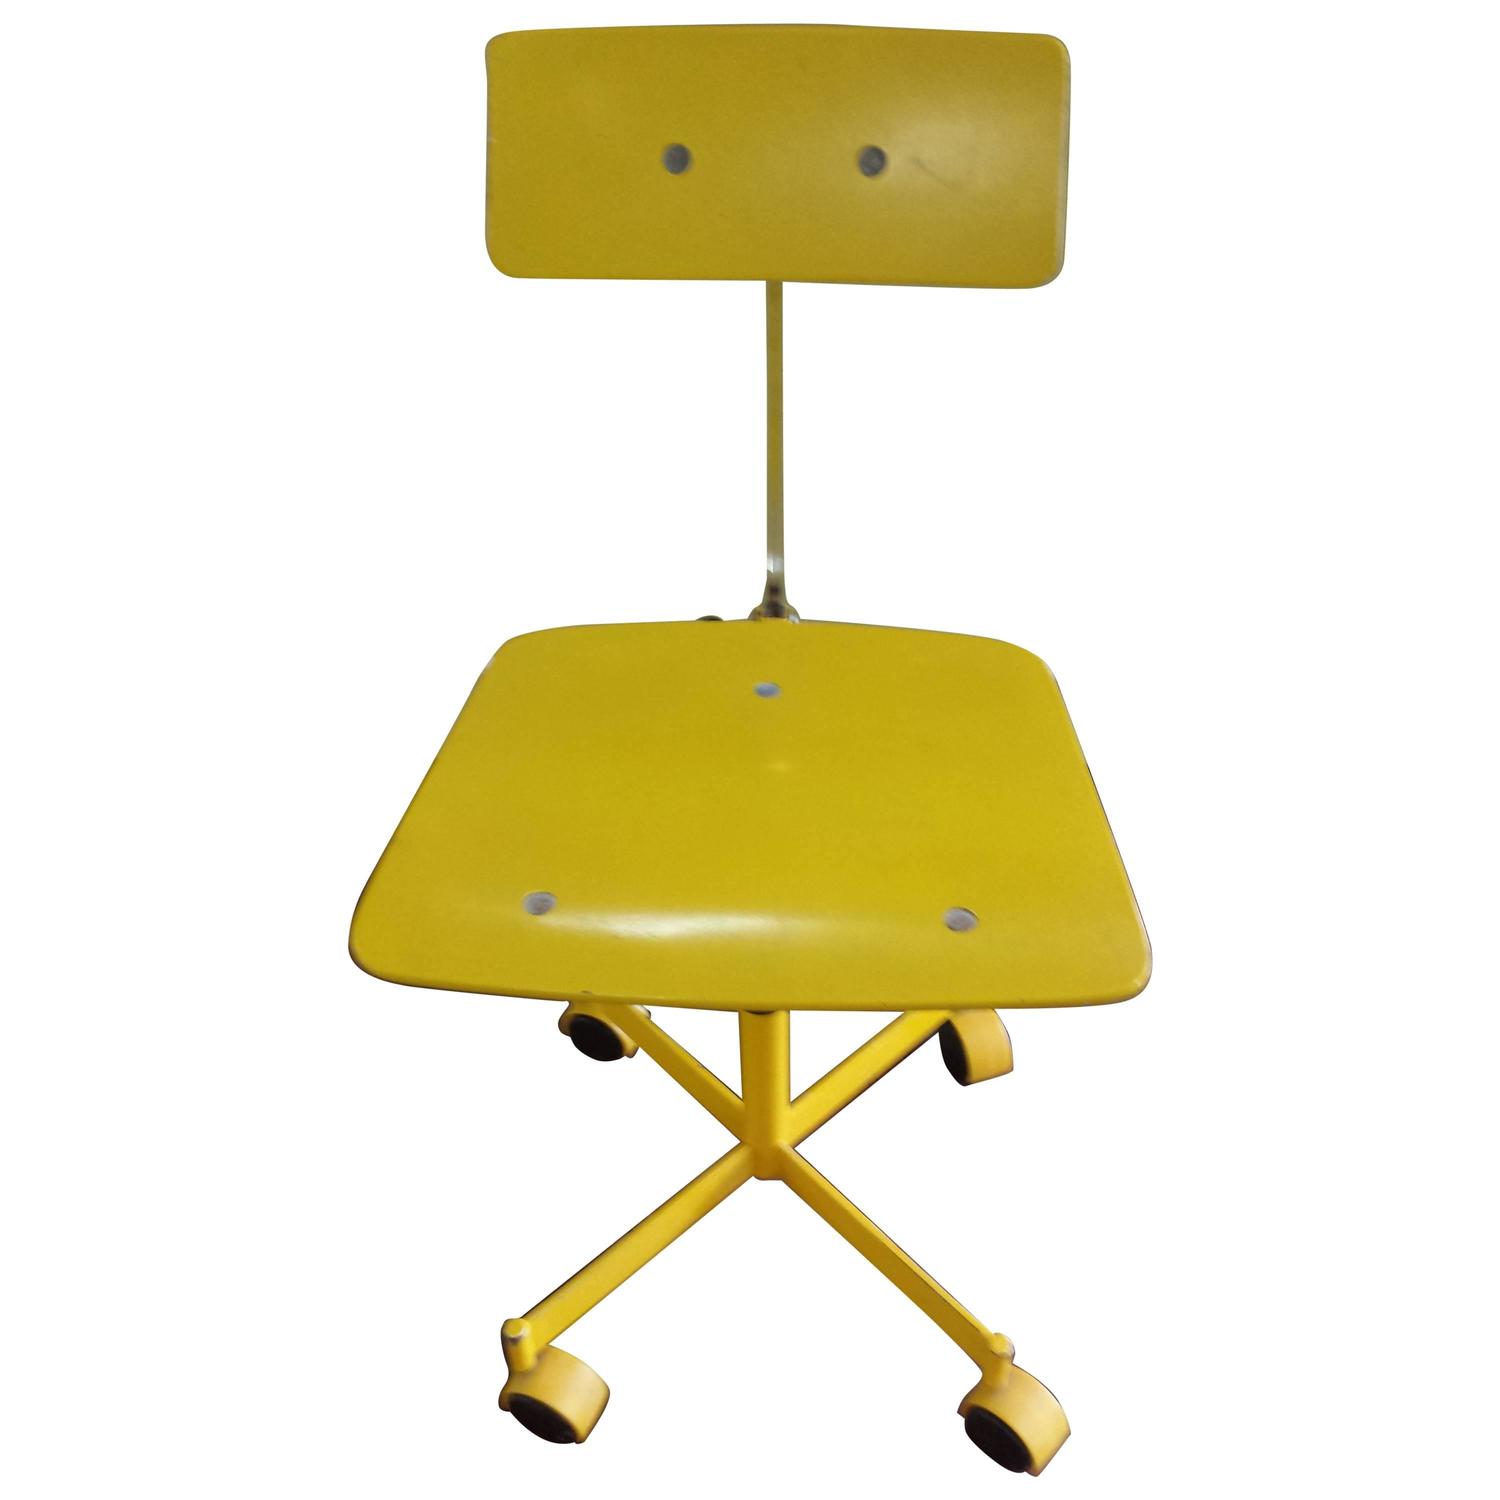 Brilliant Yellow Kevi Armless Fully Adjustable Desk Chair